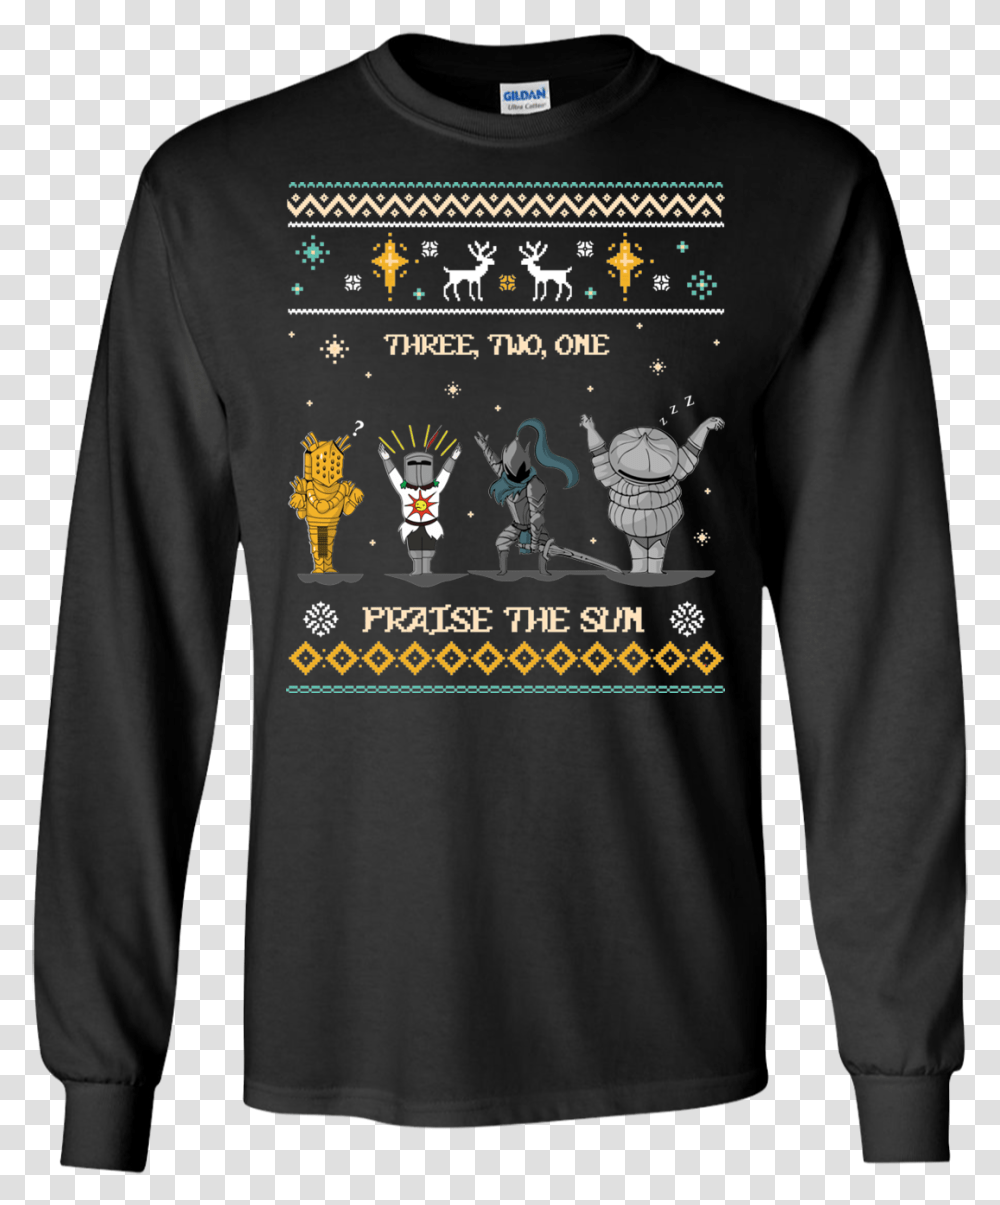 Awaiting Product Image Praise The Sun Christmas Sweater, Sleeve, Apparel, Long Sleeve Transparent Png